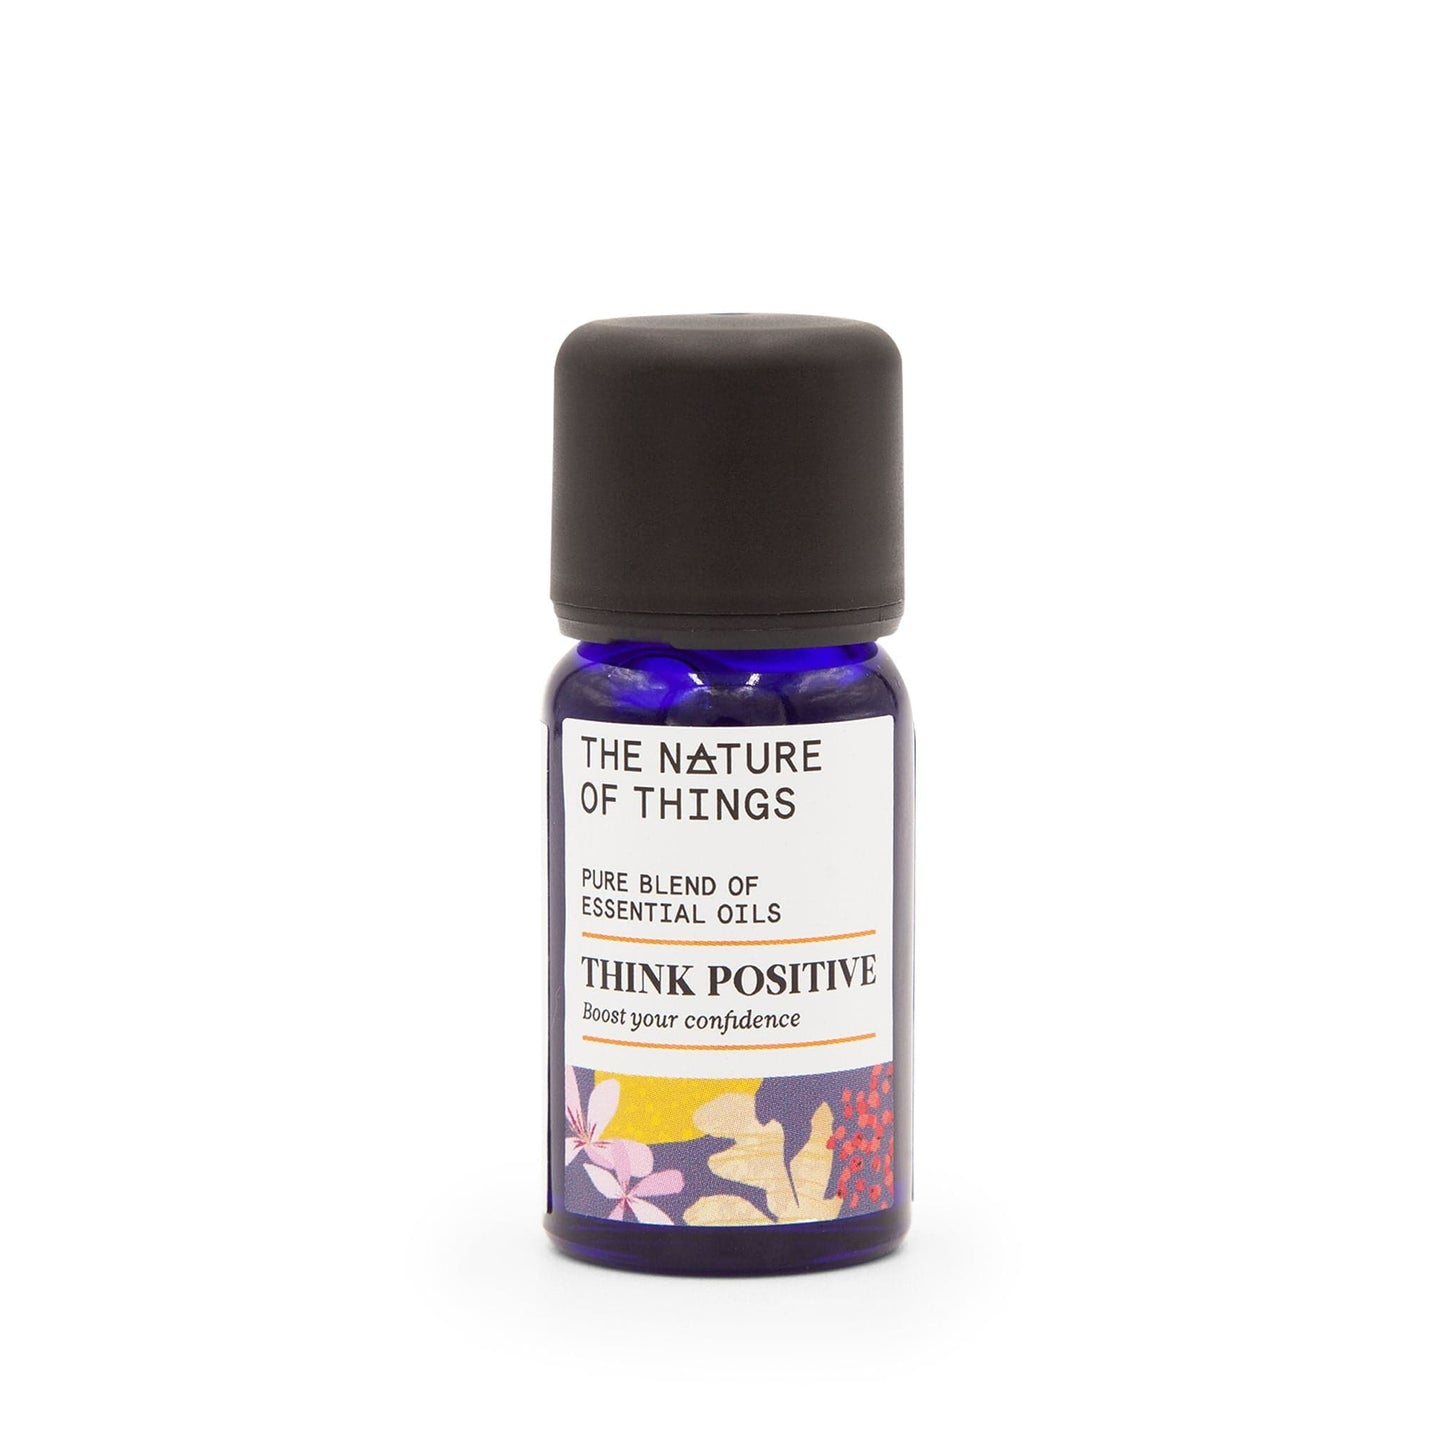 Load image into Gallery viewer, The Nature of Things Essential Oil Think Positive Essential Oil Blend 12ml - The Nature of Things
